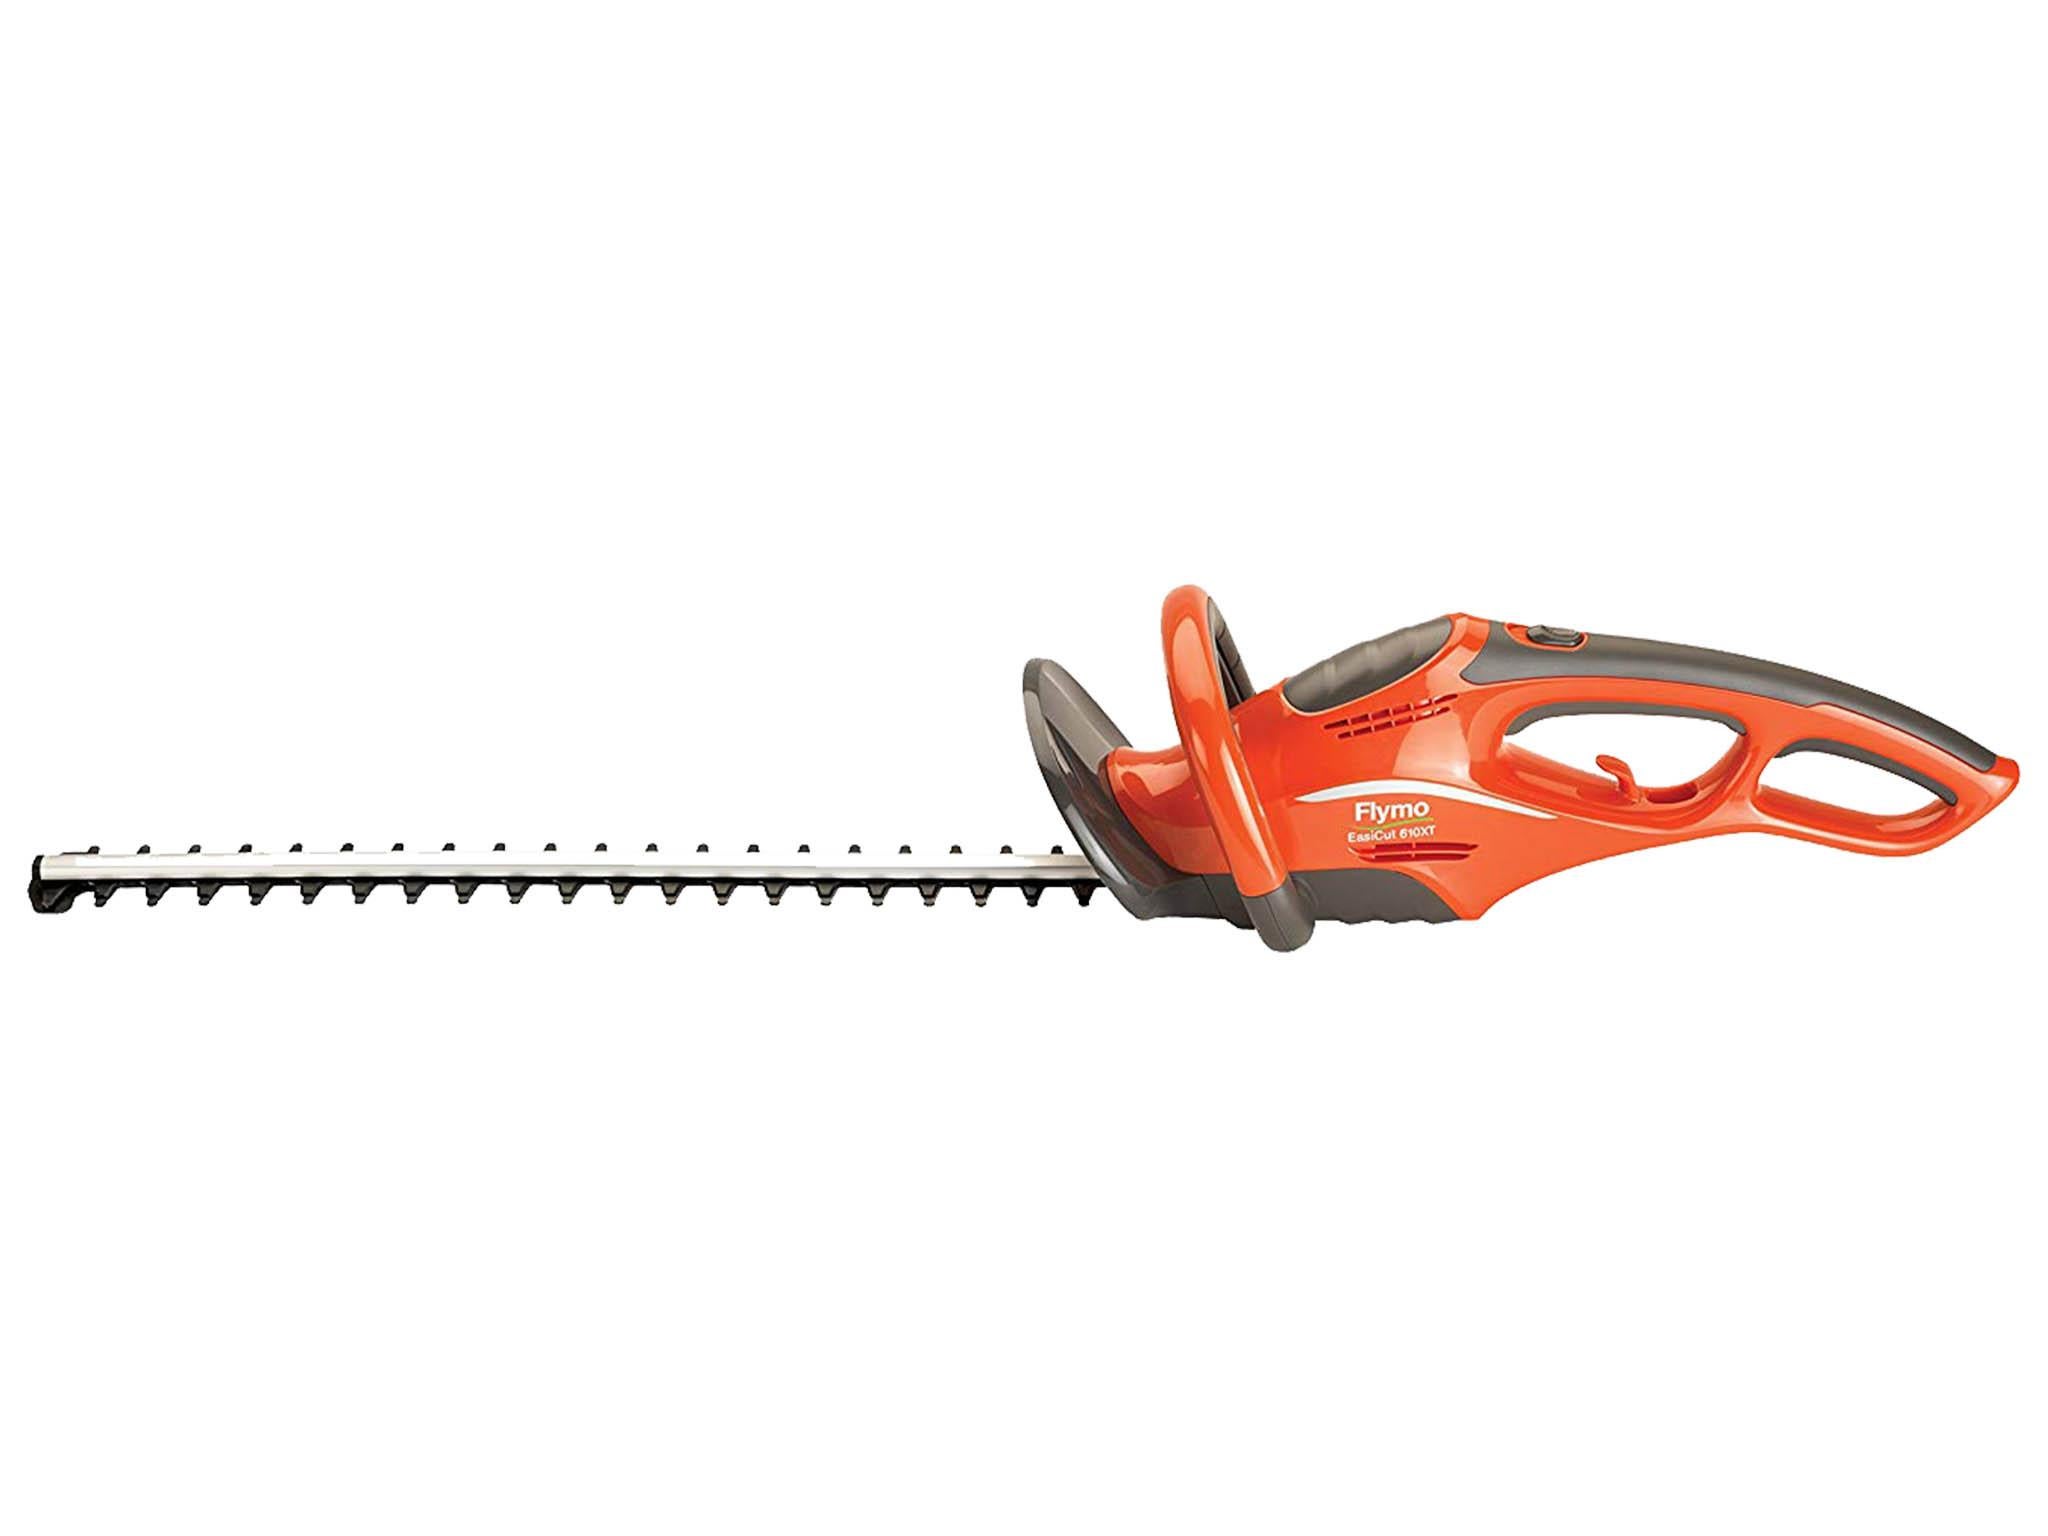 12 Best Hedge Trimmers The Independent